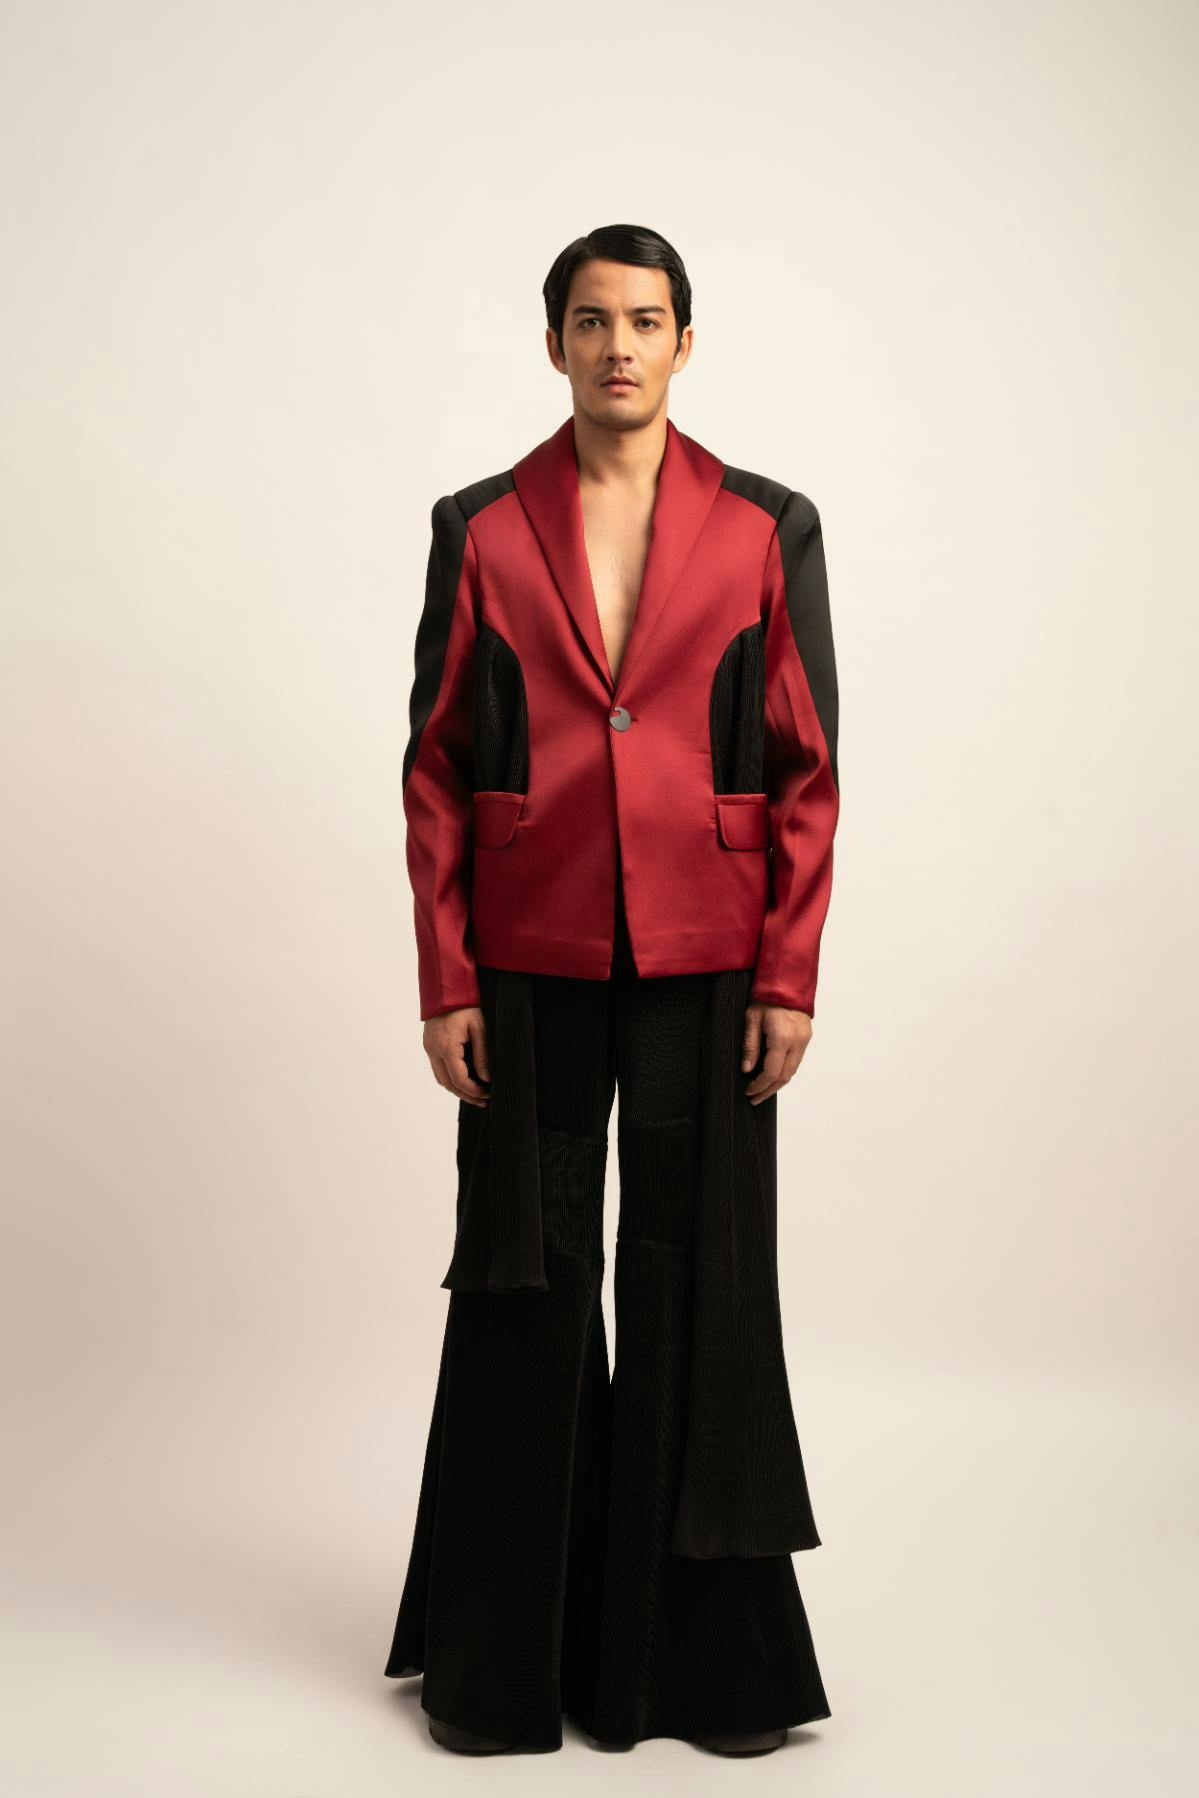 The Futurist Monarch Blazer Set, a product by Siddhant Agrawal Label